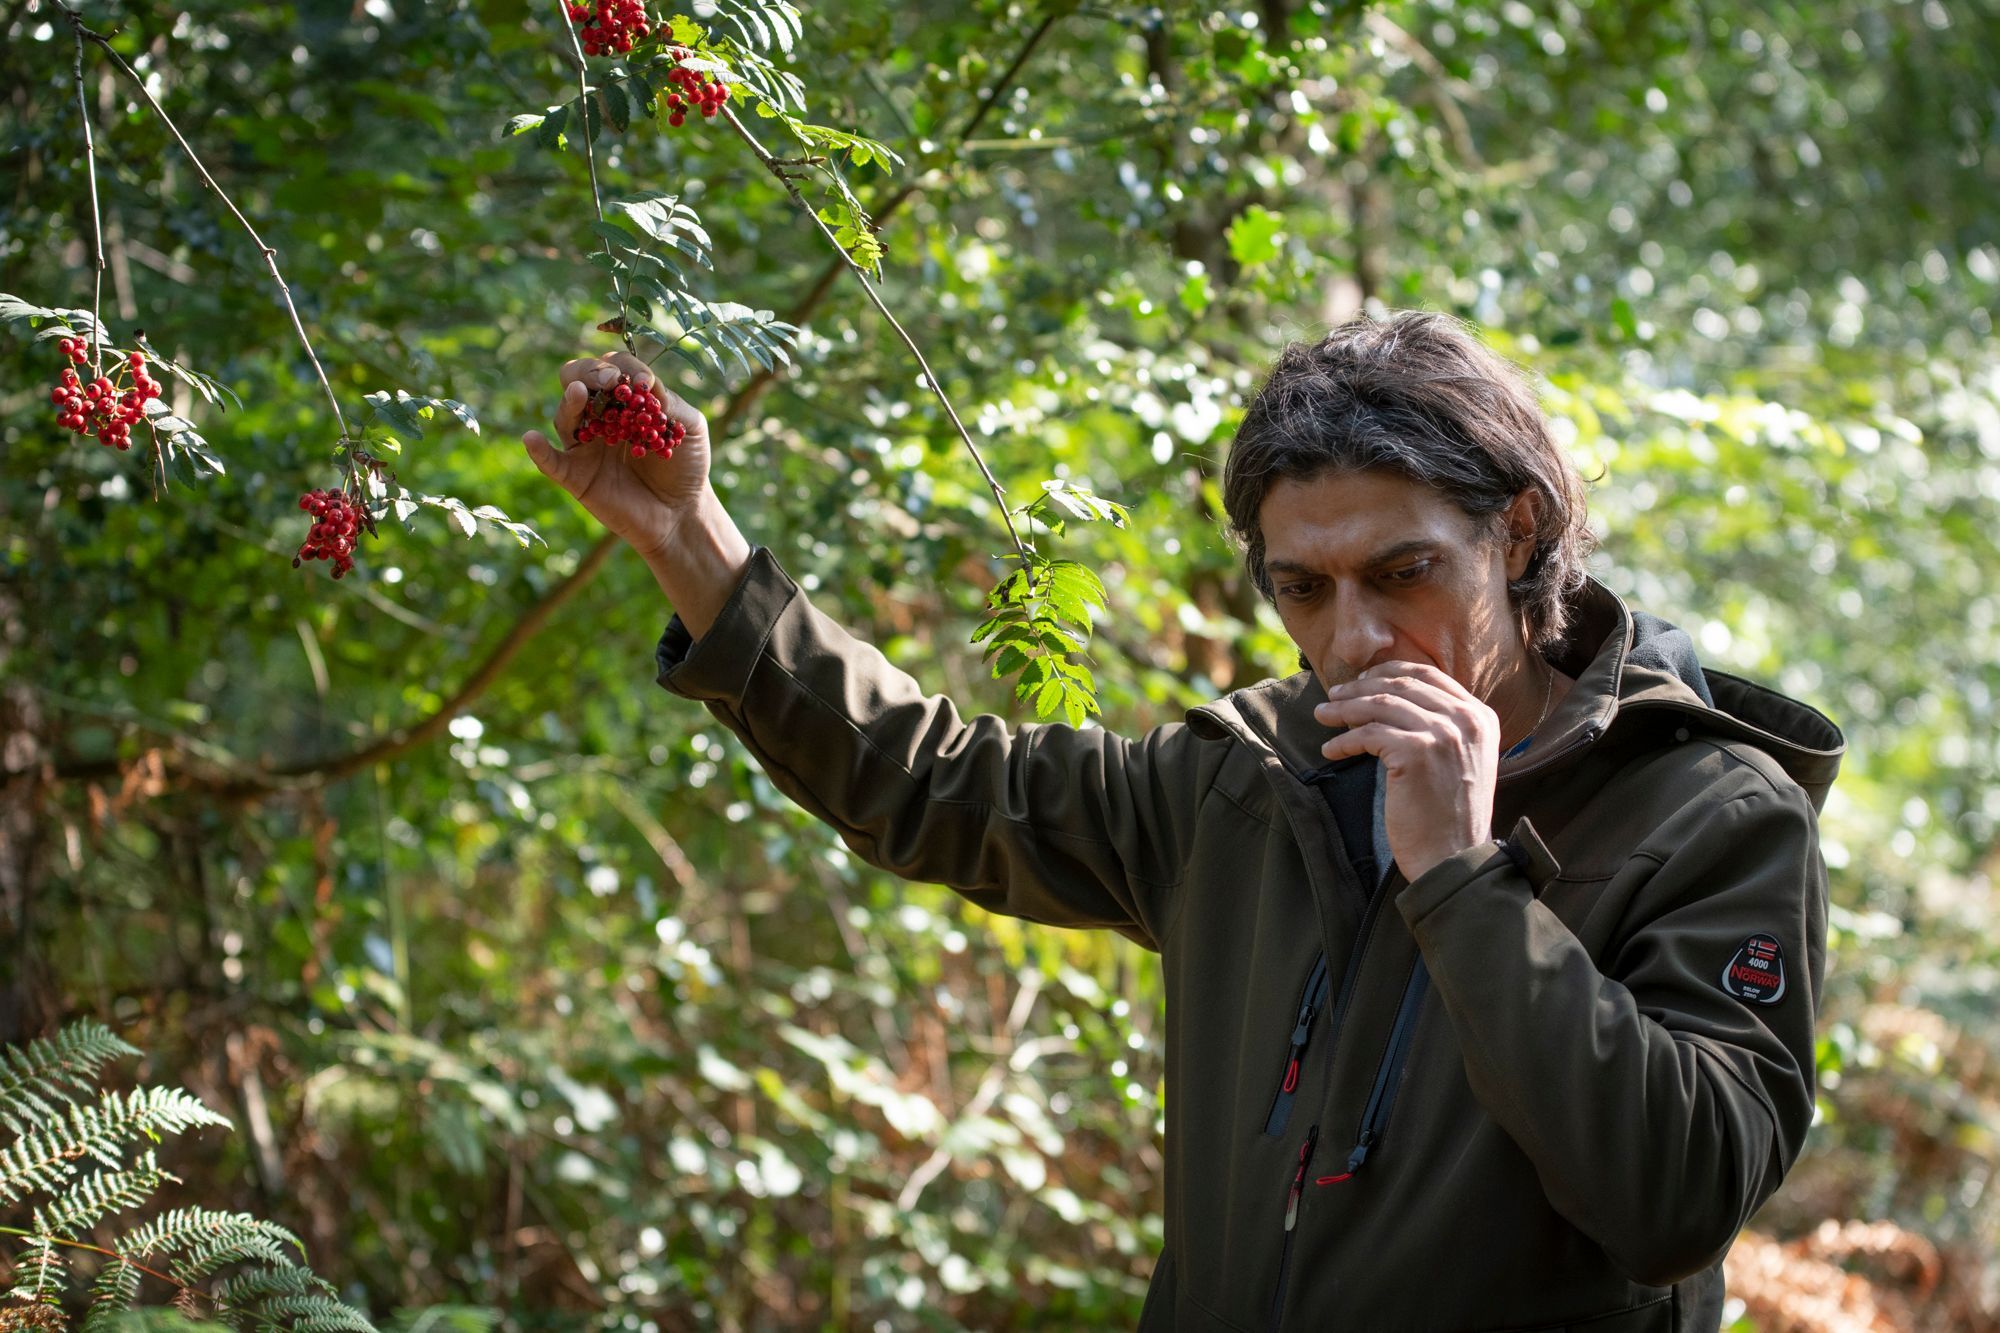 Ben checking the smell of redcurrants